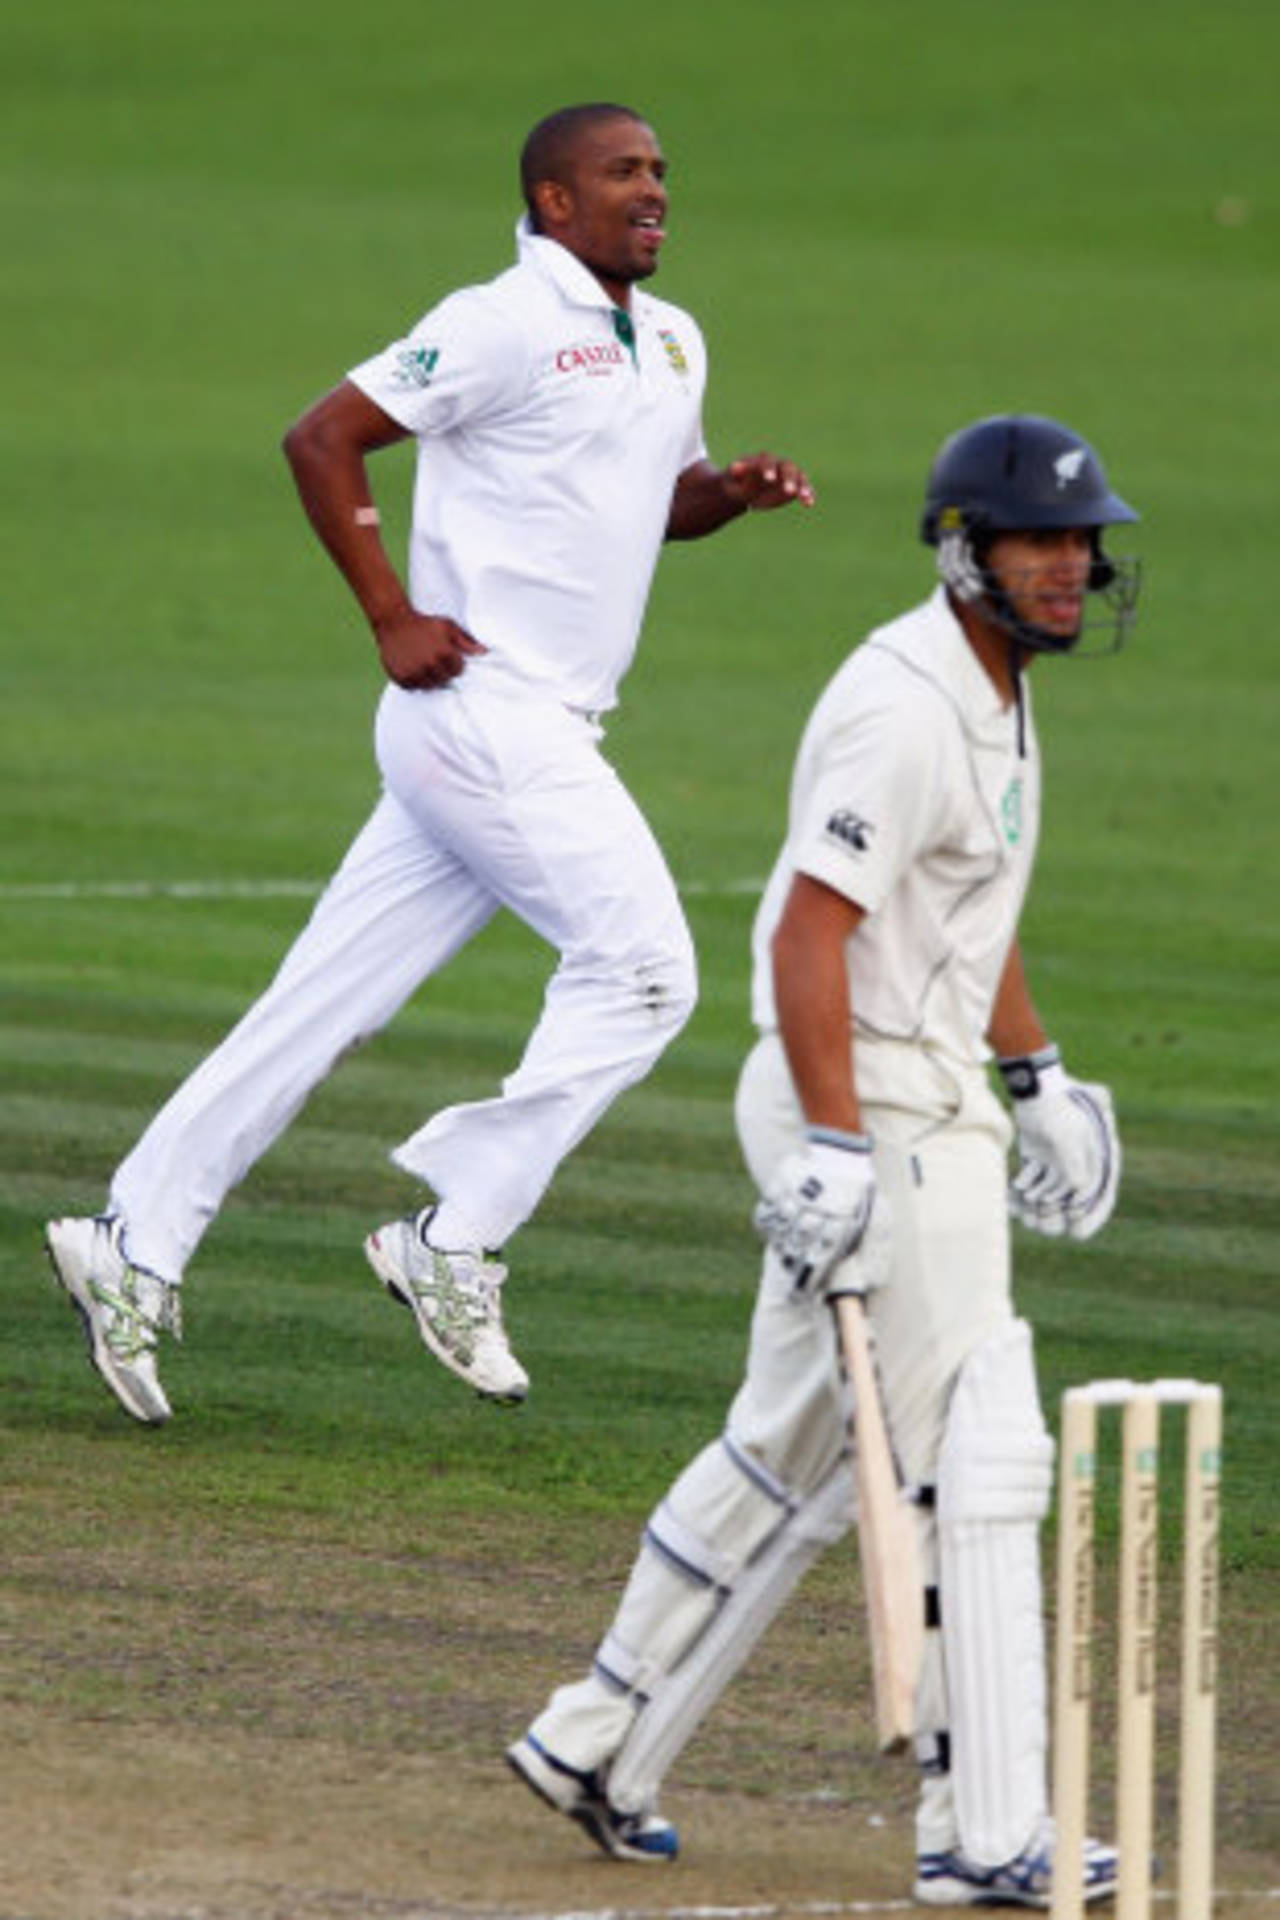 Vernon Philander took out a settled Ross Taylor, New Zealand v South Africa, 2nd Test, Hamilton, 1st day, March 15, 2012